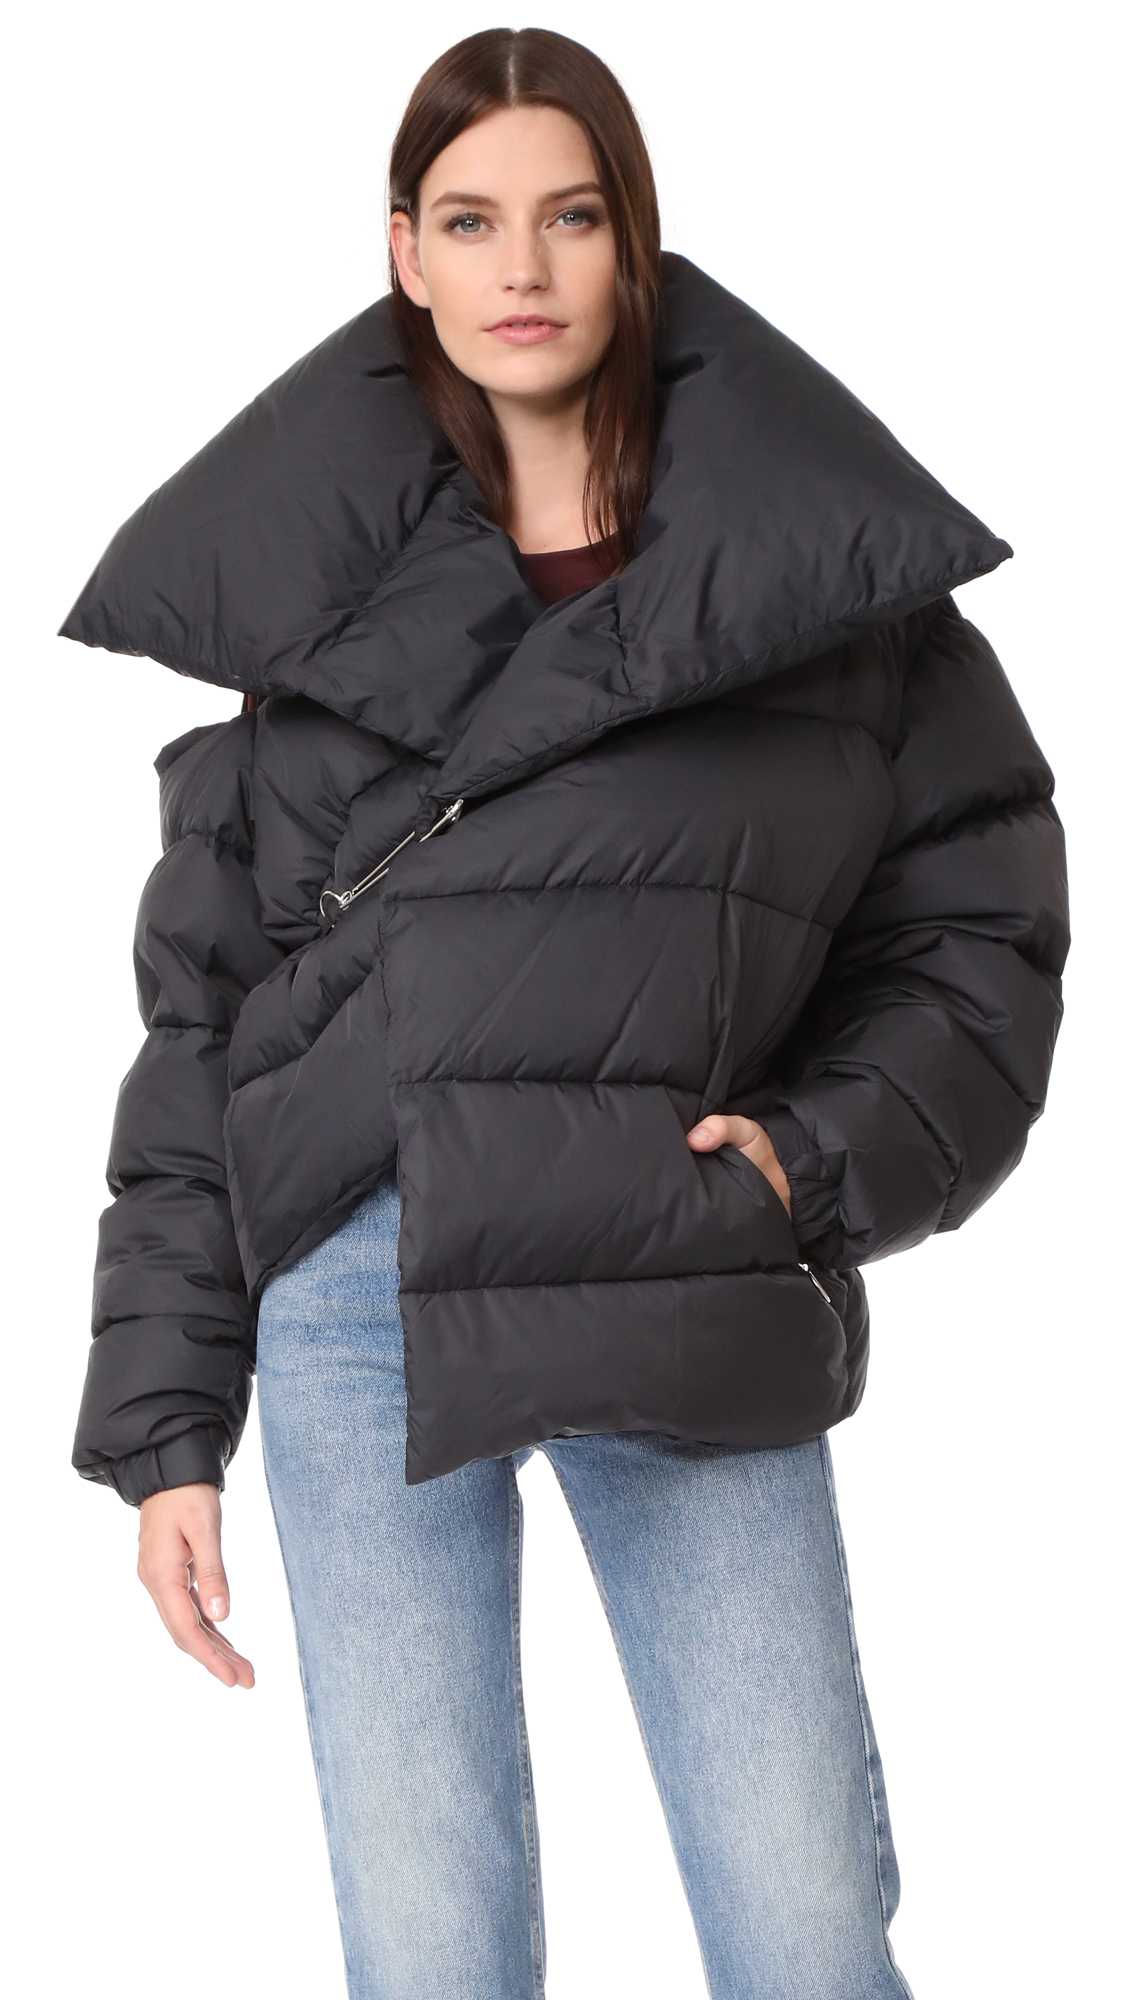 Asymmetrical puffer jacket by Marques Almeida available at Shopbop